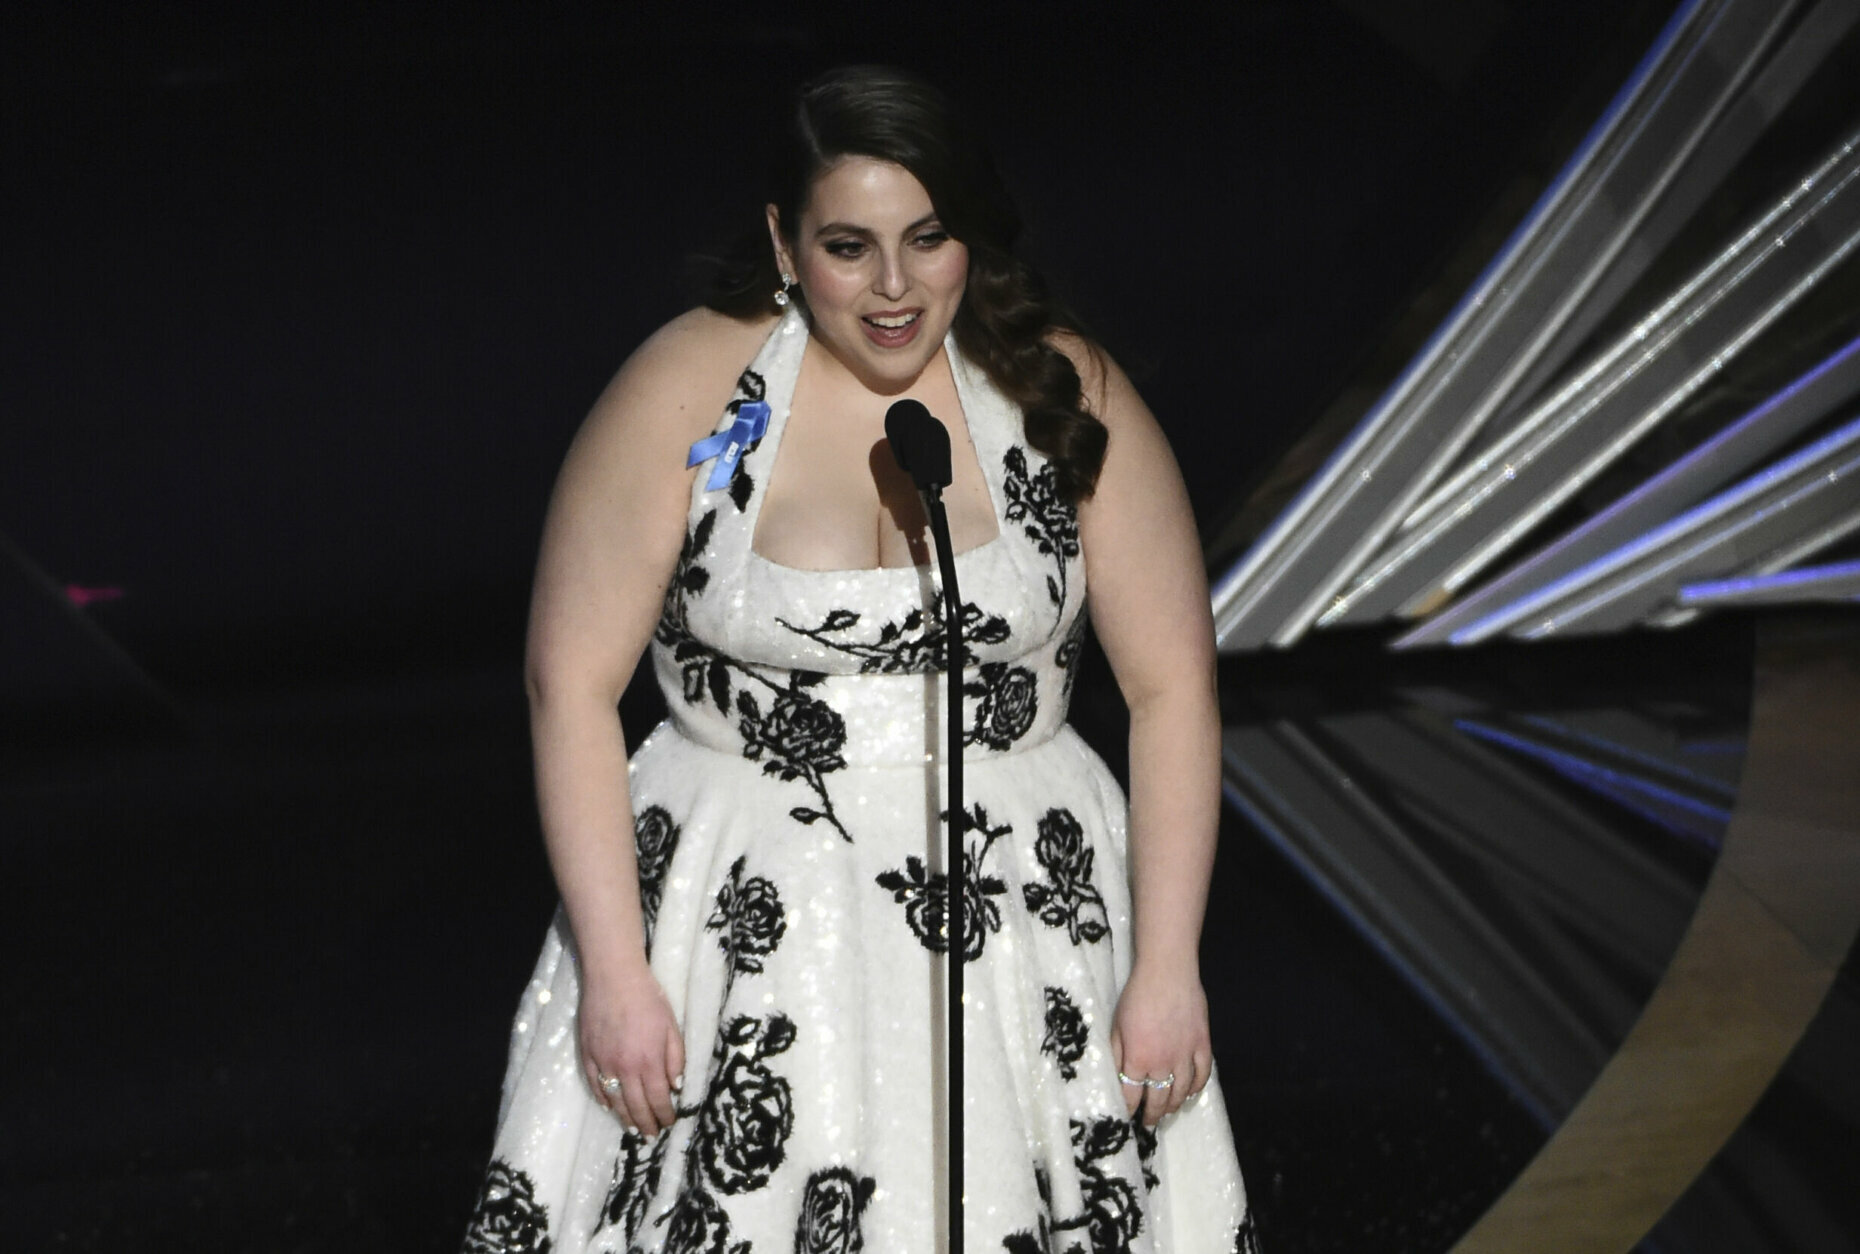 Beanie Feldstein speaks onstage at the Oscars on Sunday, Feb. 9, 2020, at the Dolby Theatre in Los Angeles. (AP Photo/Chris Pizzello)